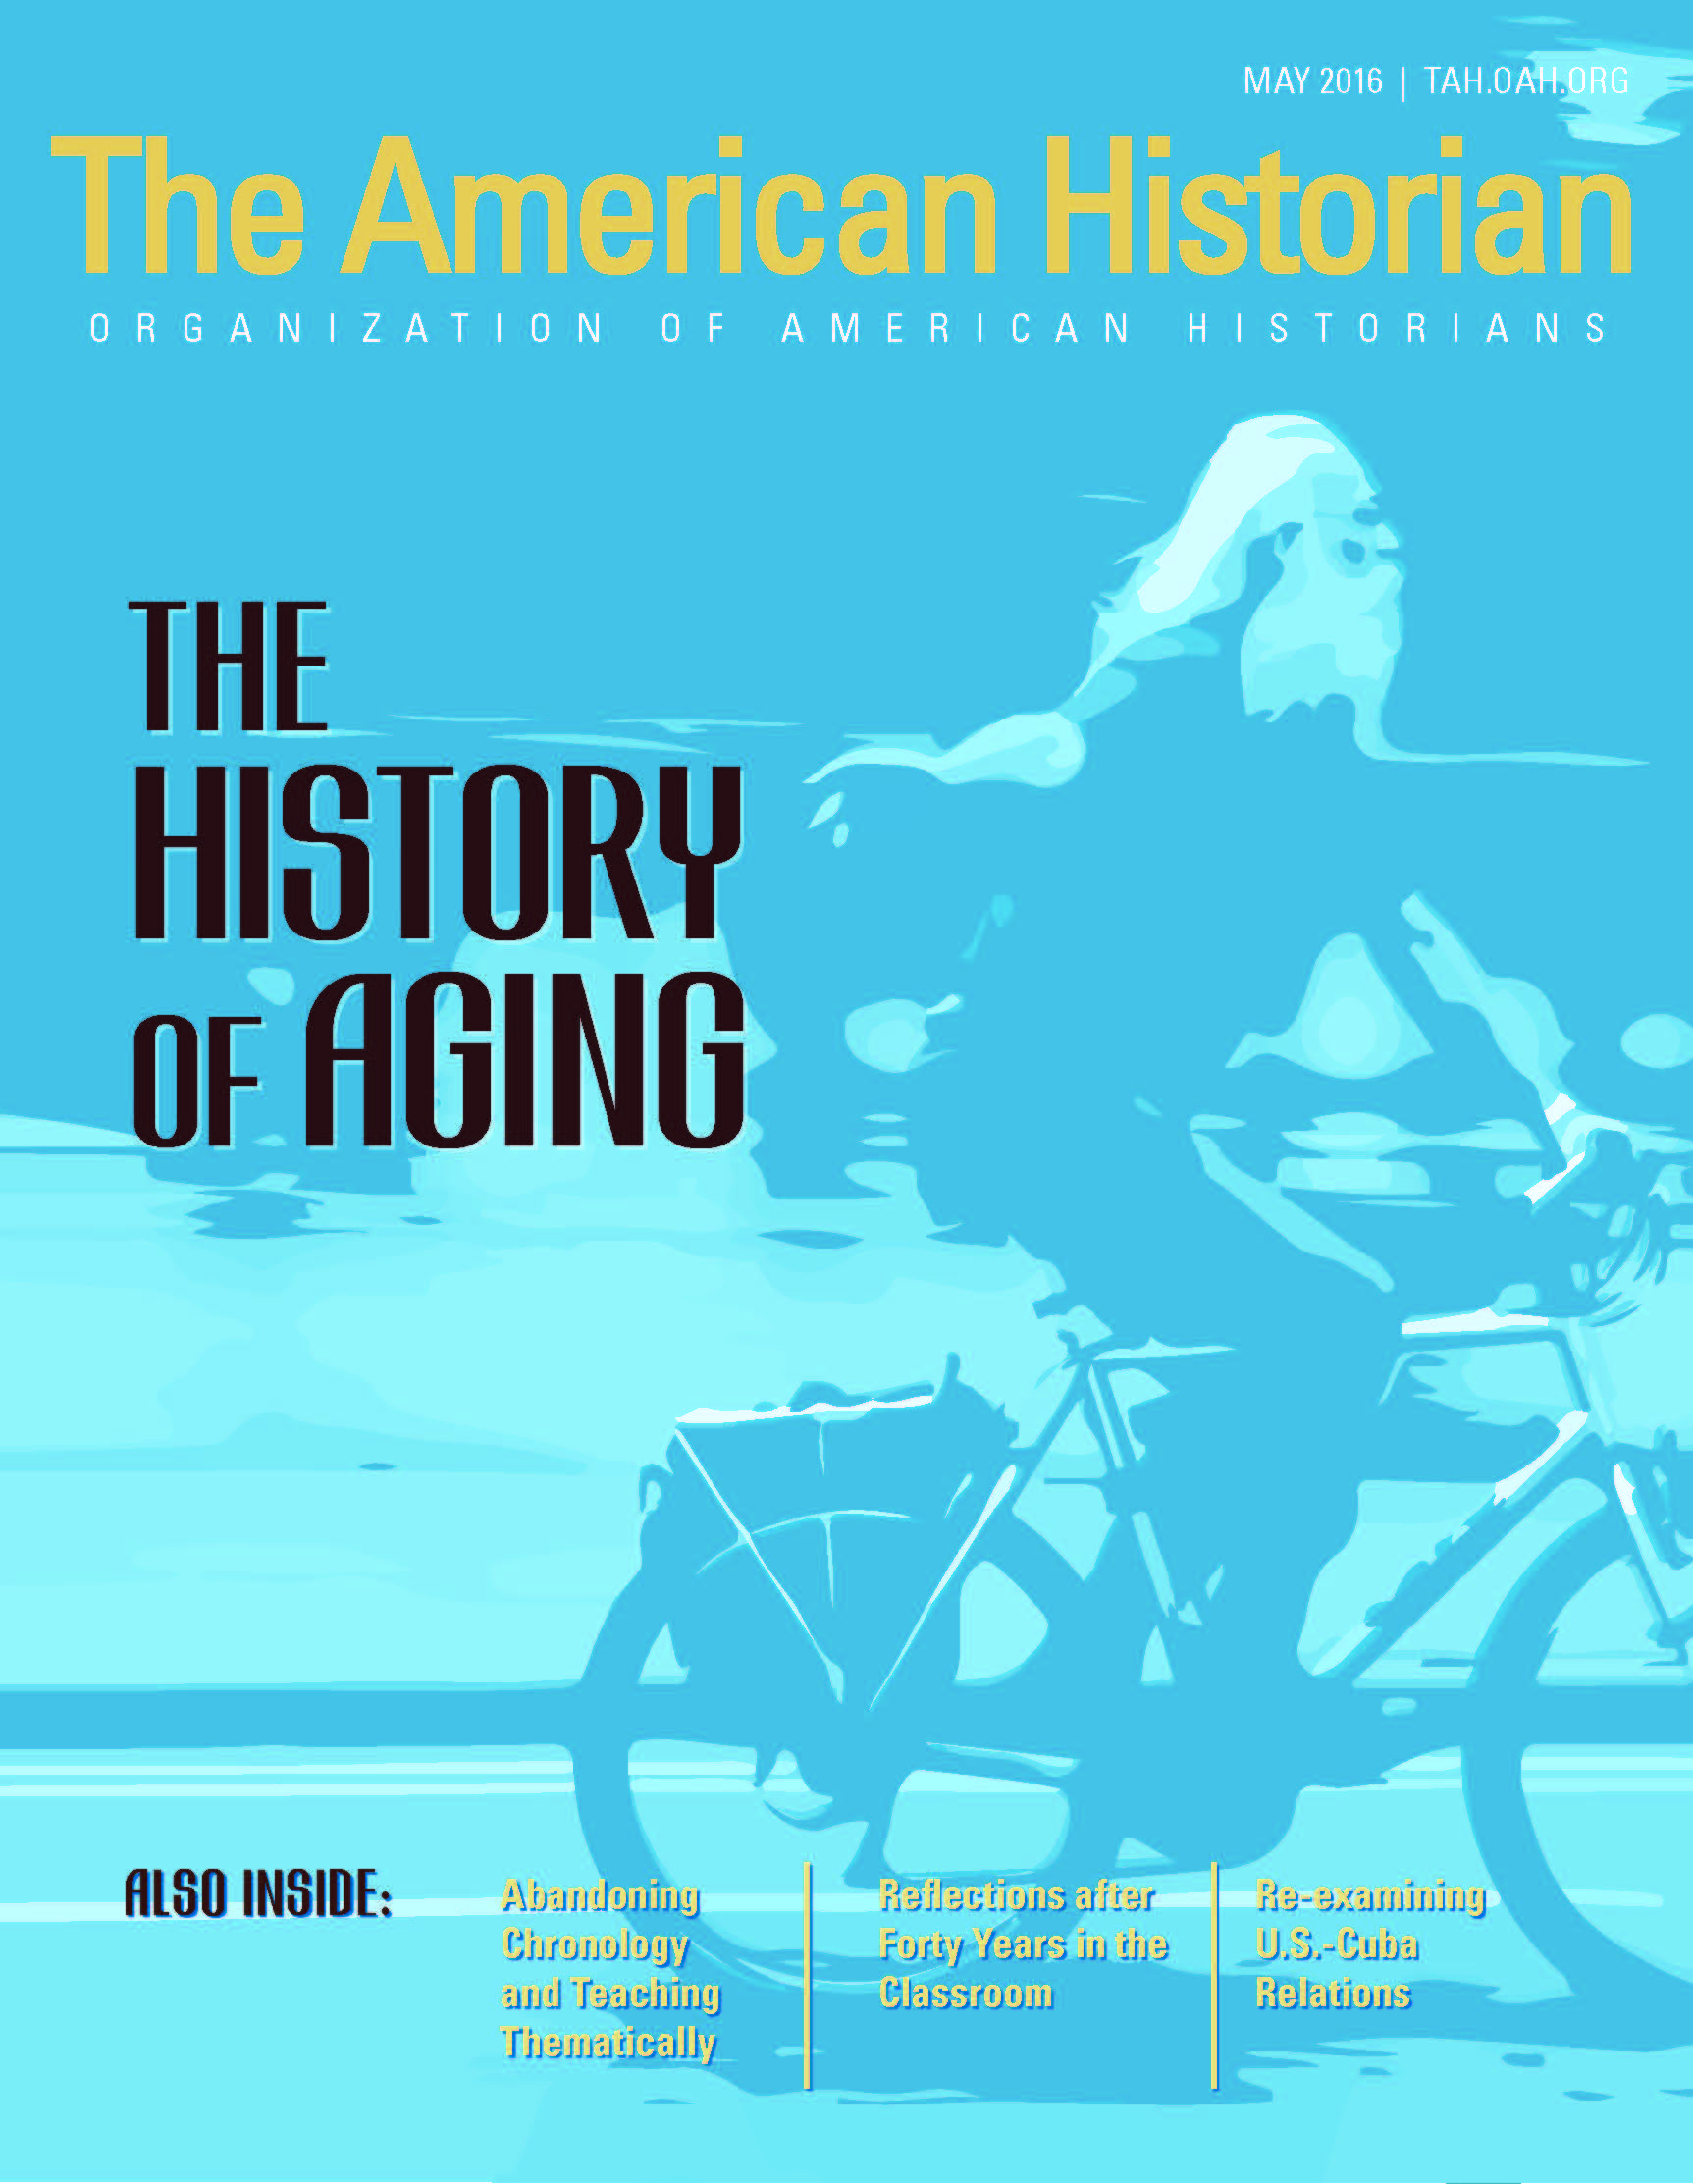 Cover image with link to The American Historian issue for The History of Aging